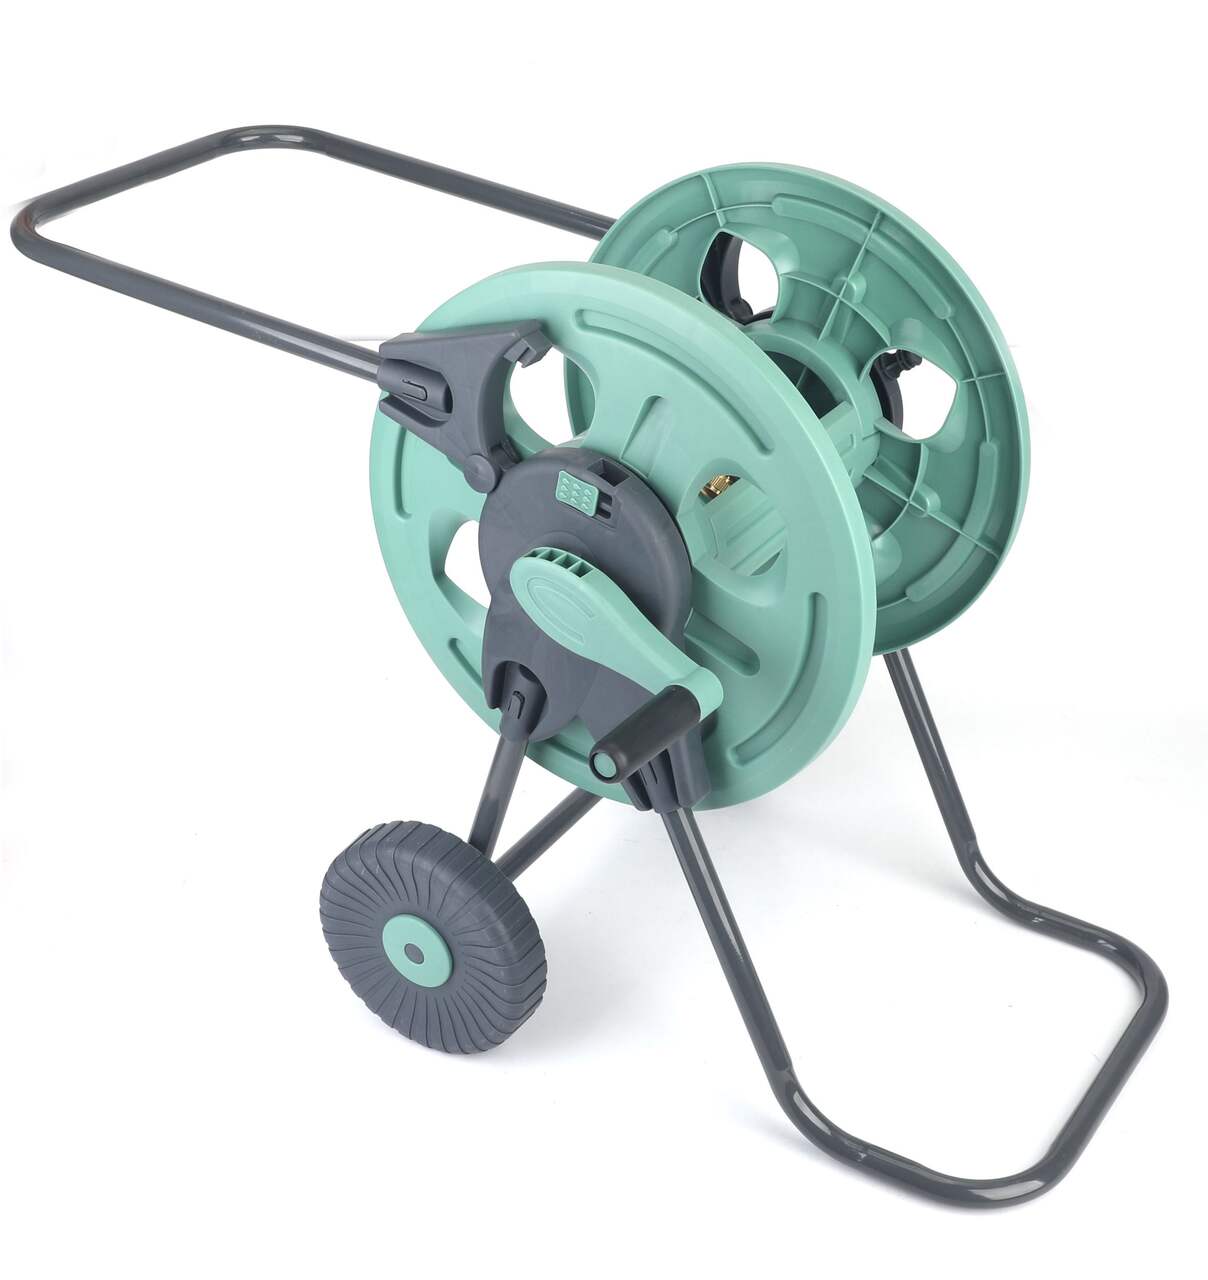 price guarantee Metal hose cart for 60m garden hose, guide for easy  winding+Free hose connectors